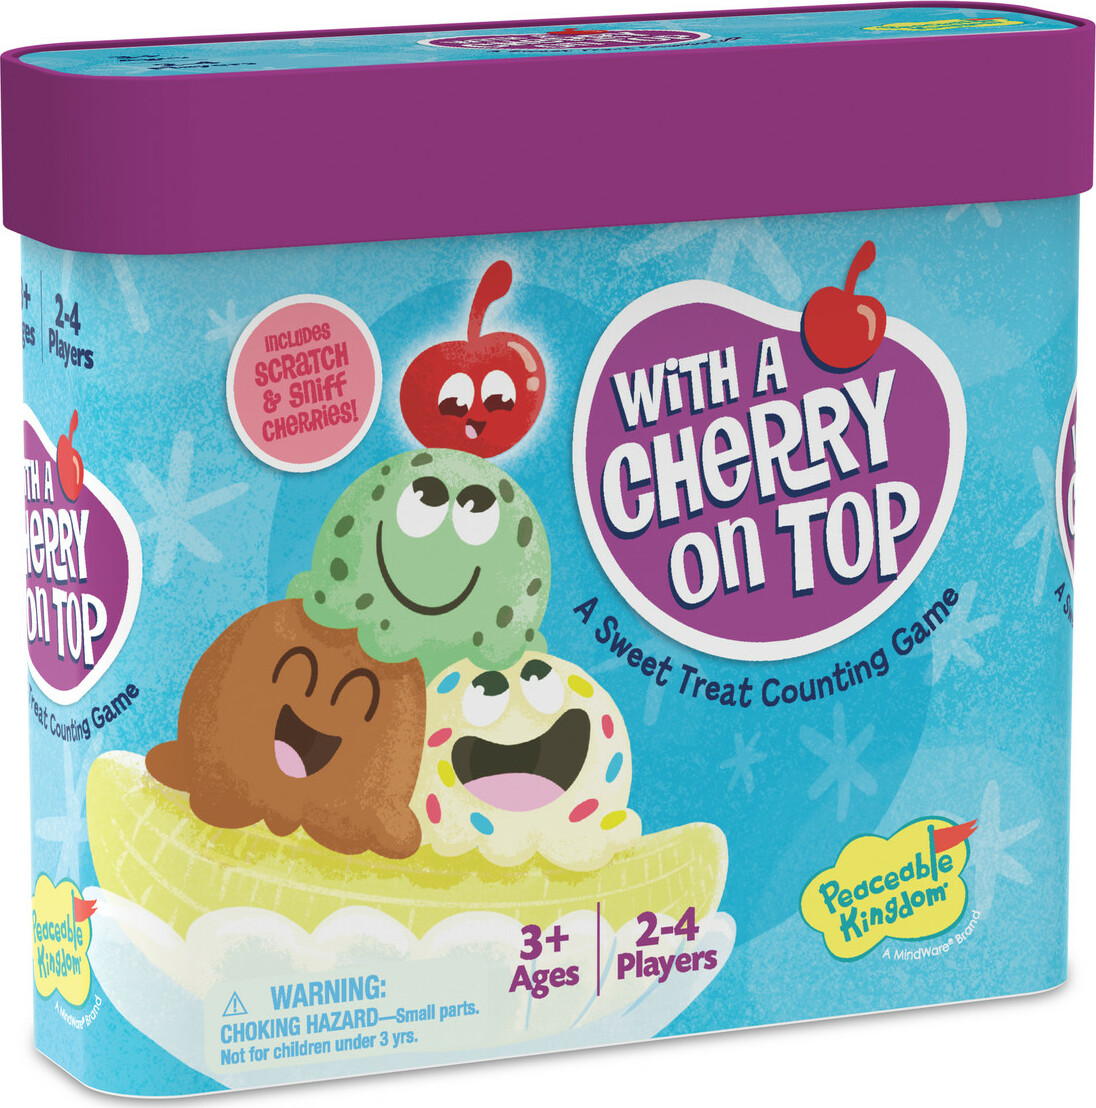 Top This! The Ice Cream Game